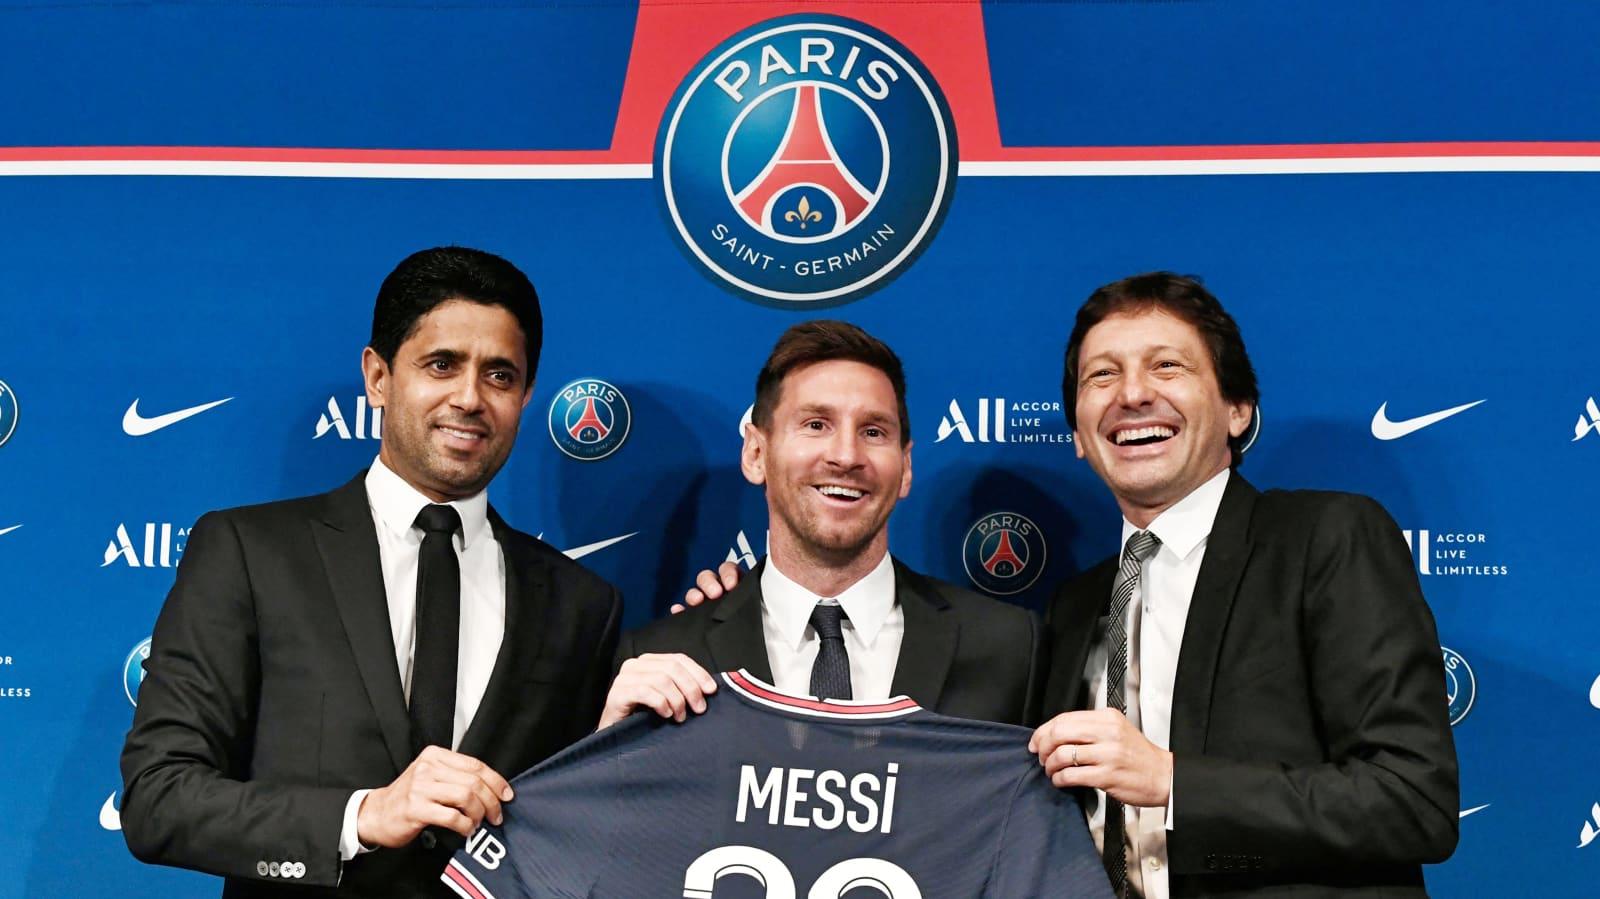 Messi PSG president says world will be shocked by revenues